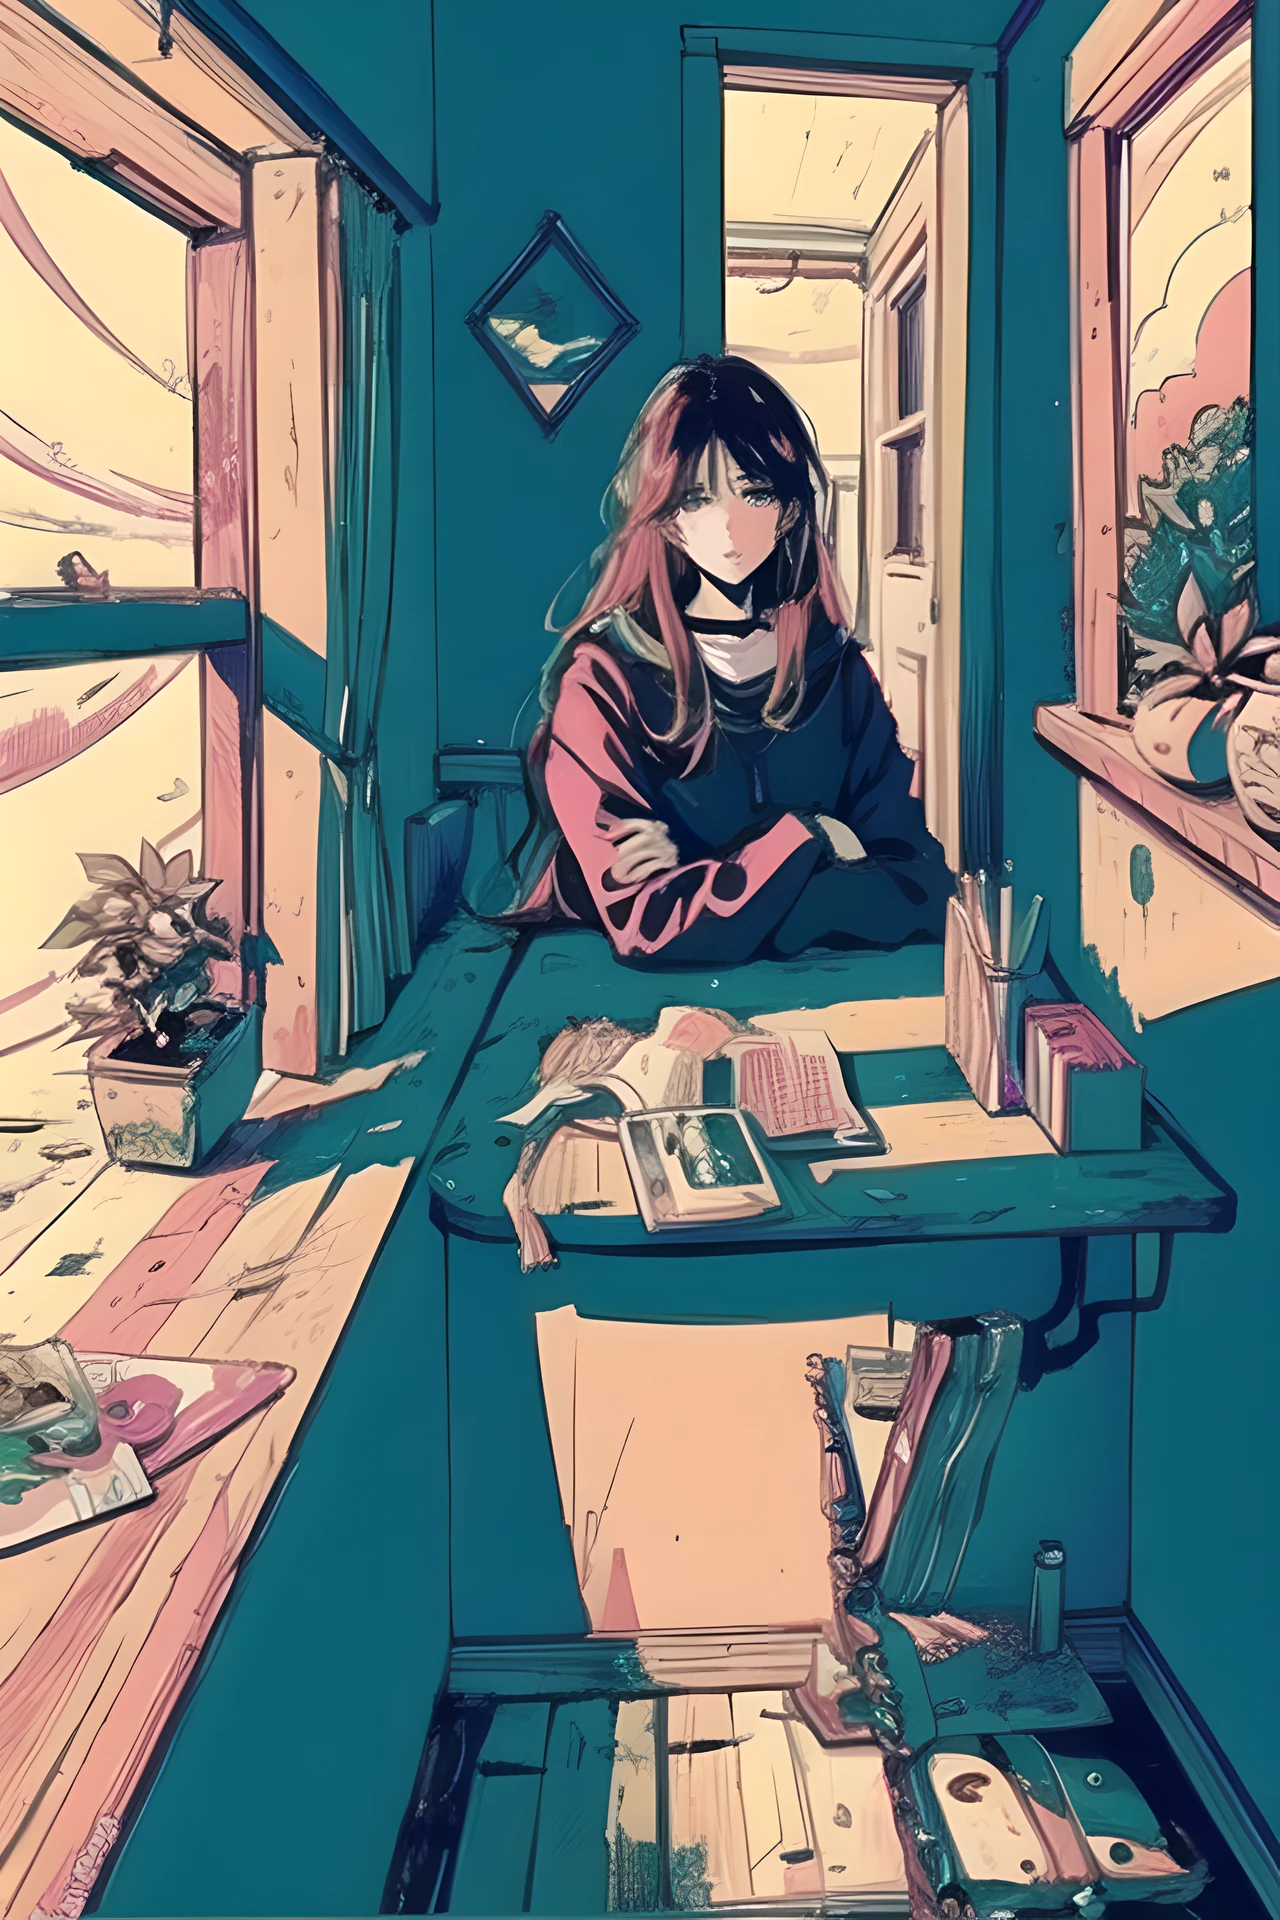 (masterpiece:1.5, best quality:1.5), ((VaporWave style, partially coloring)), close-up, from above, cinematic angle, 
1girl, Look tired, long_hair, solo, in bedroom, dolls were in a mess, decadent life, 
pole outside the window, sunset outside the window, street outside the window, the sunset outside the window,